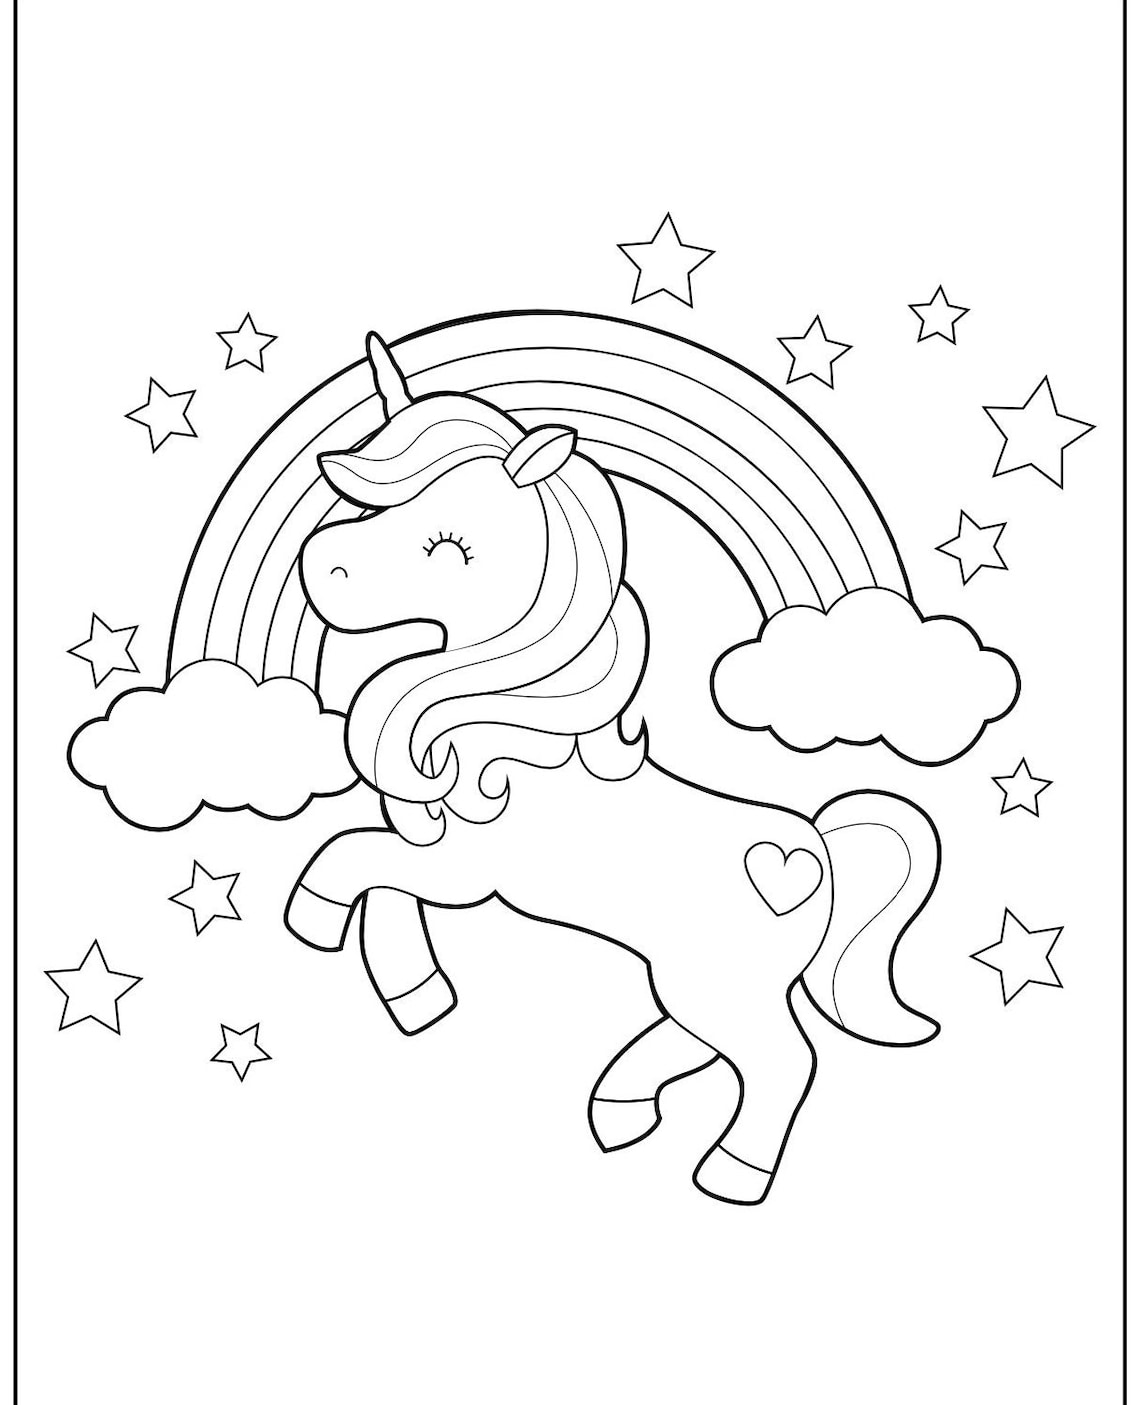 Unicorn Coloring Pages - Etsy